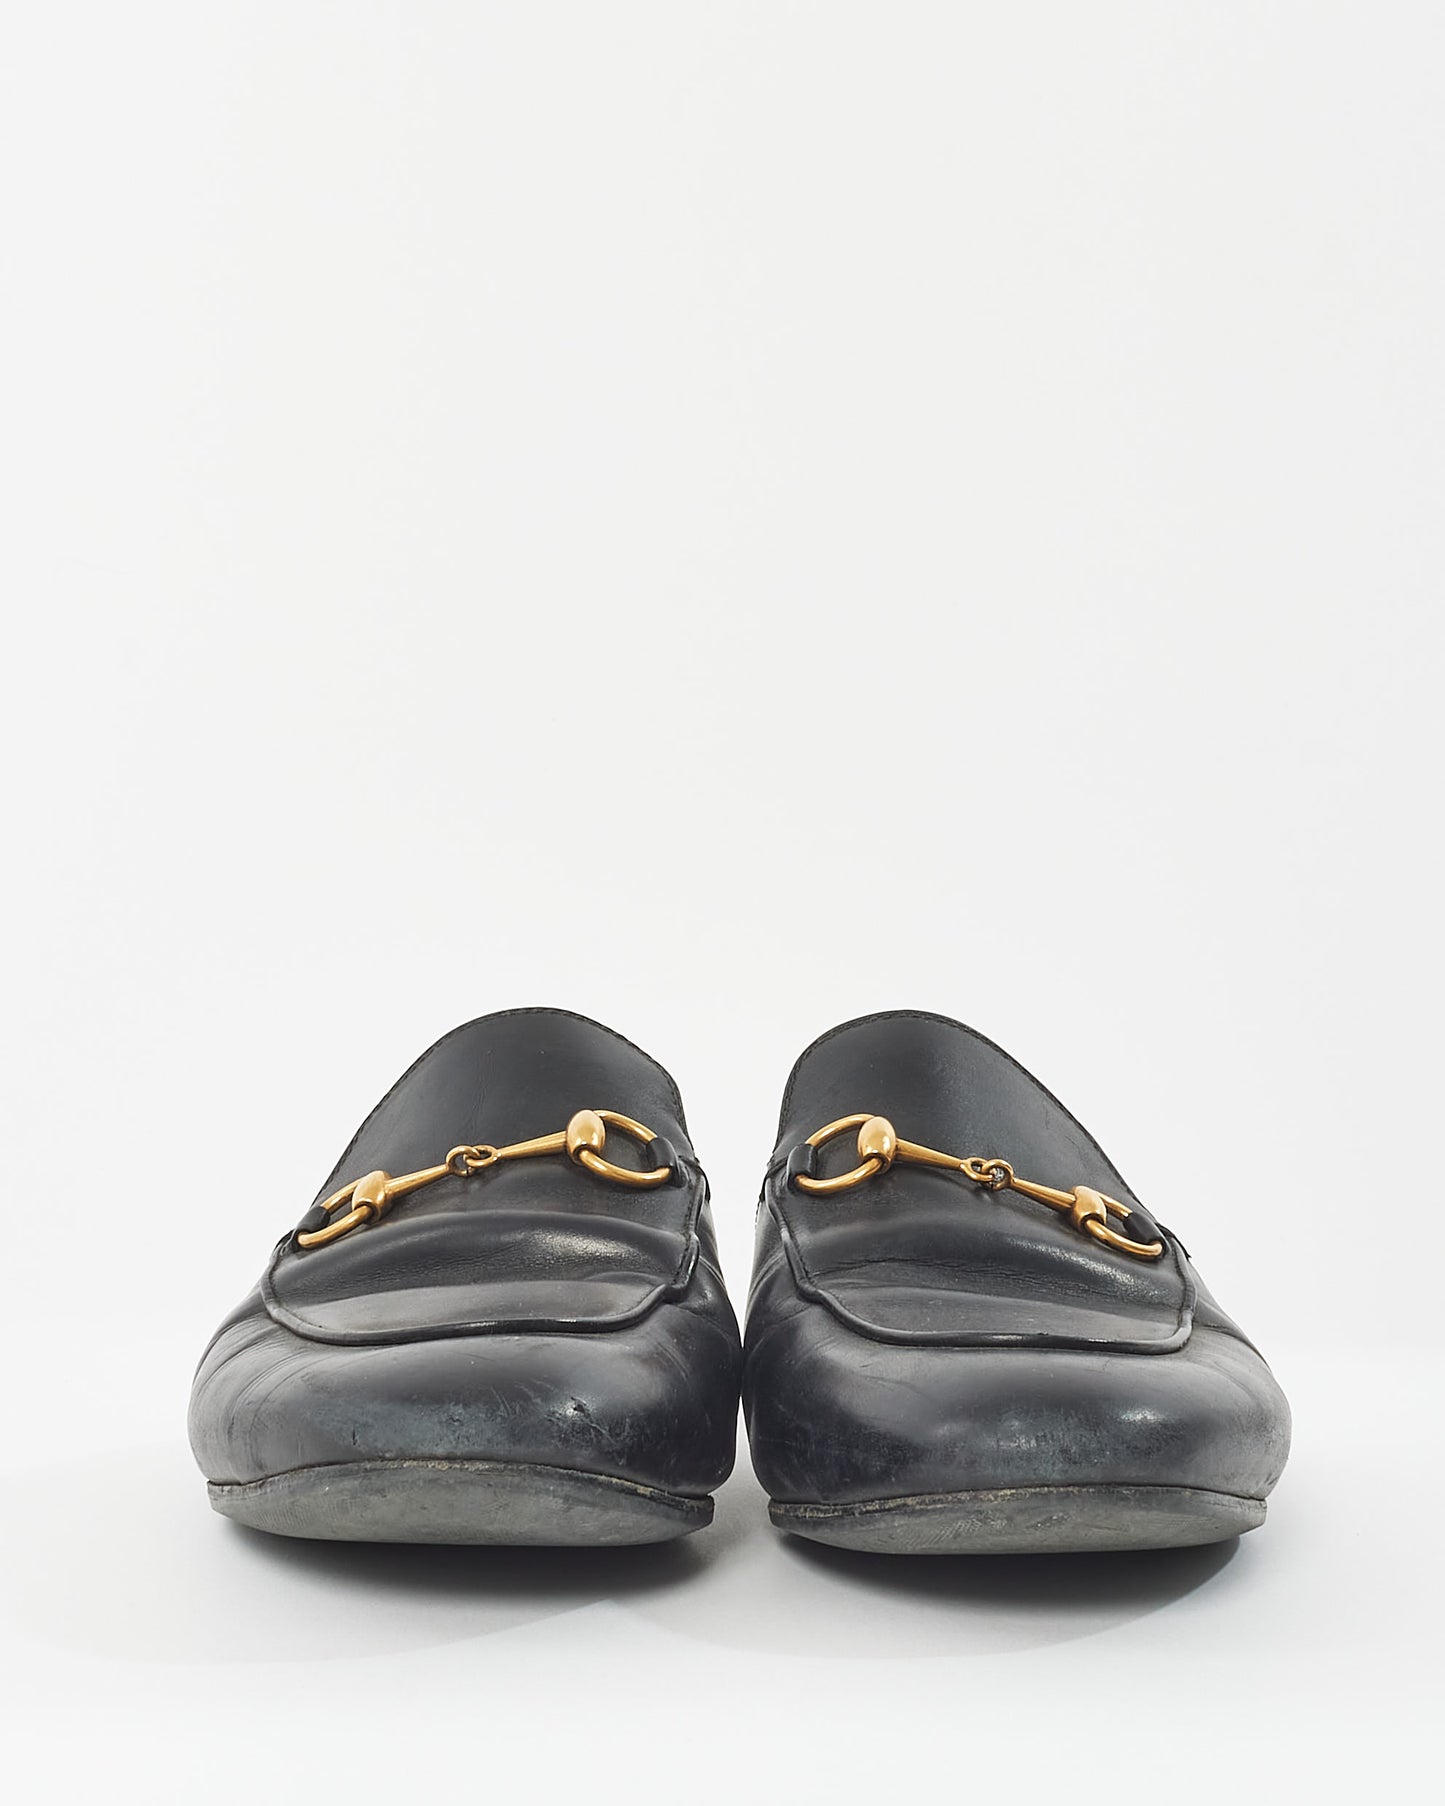 Gucci Black Leather Princeton Slip On Loafers - 38